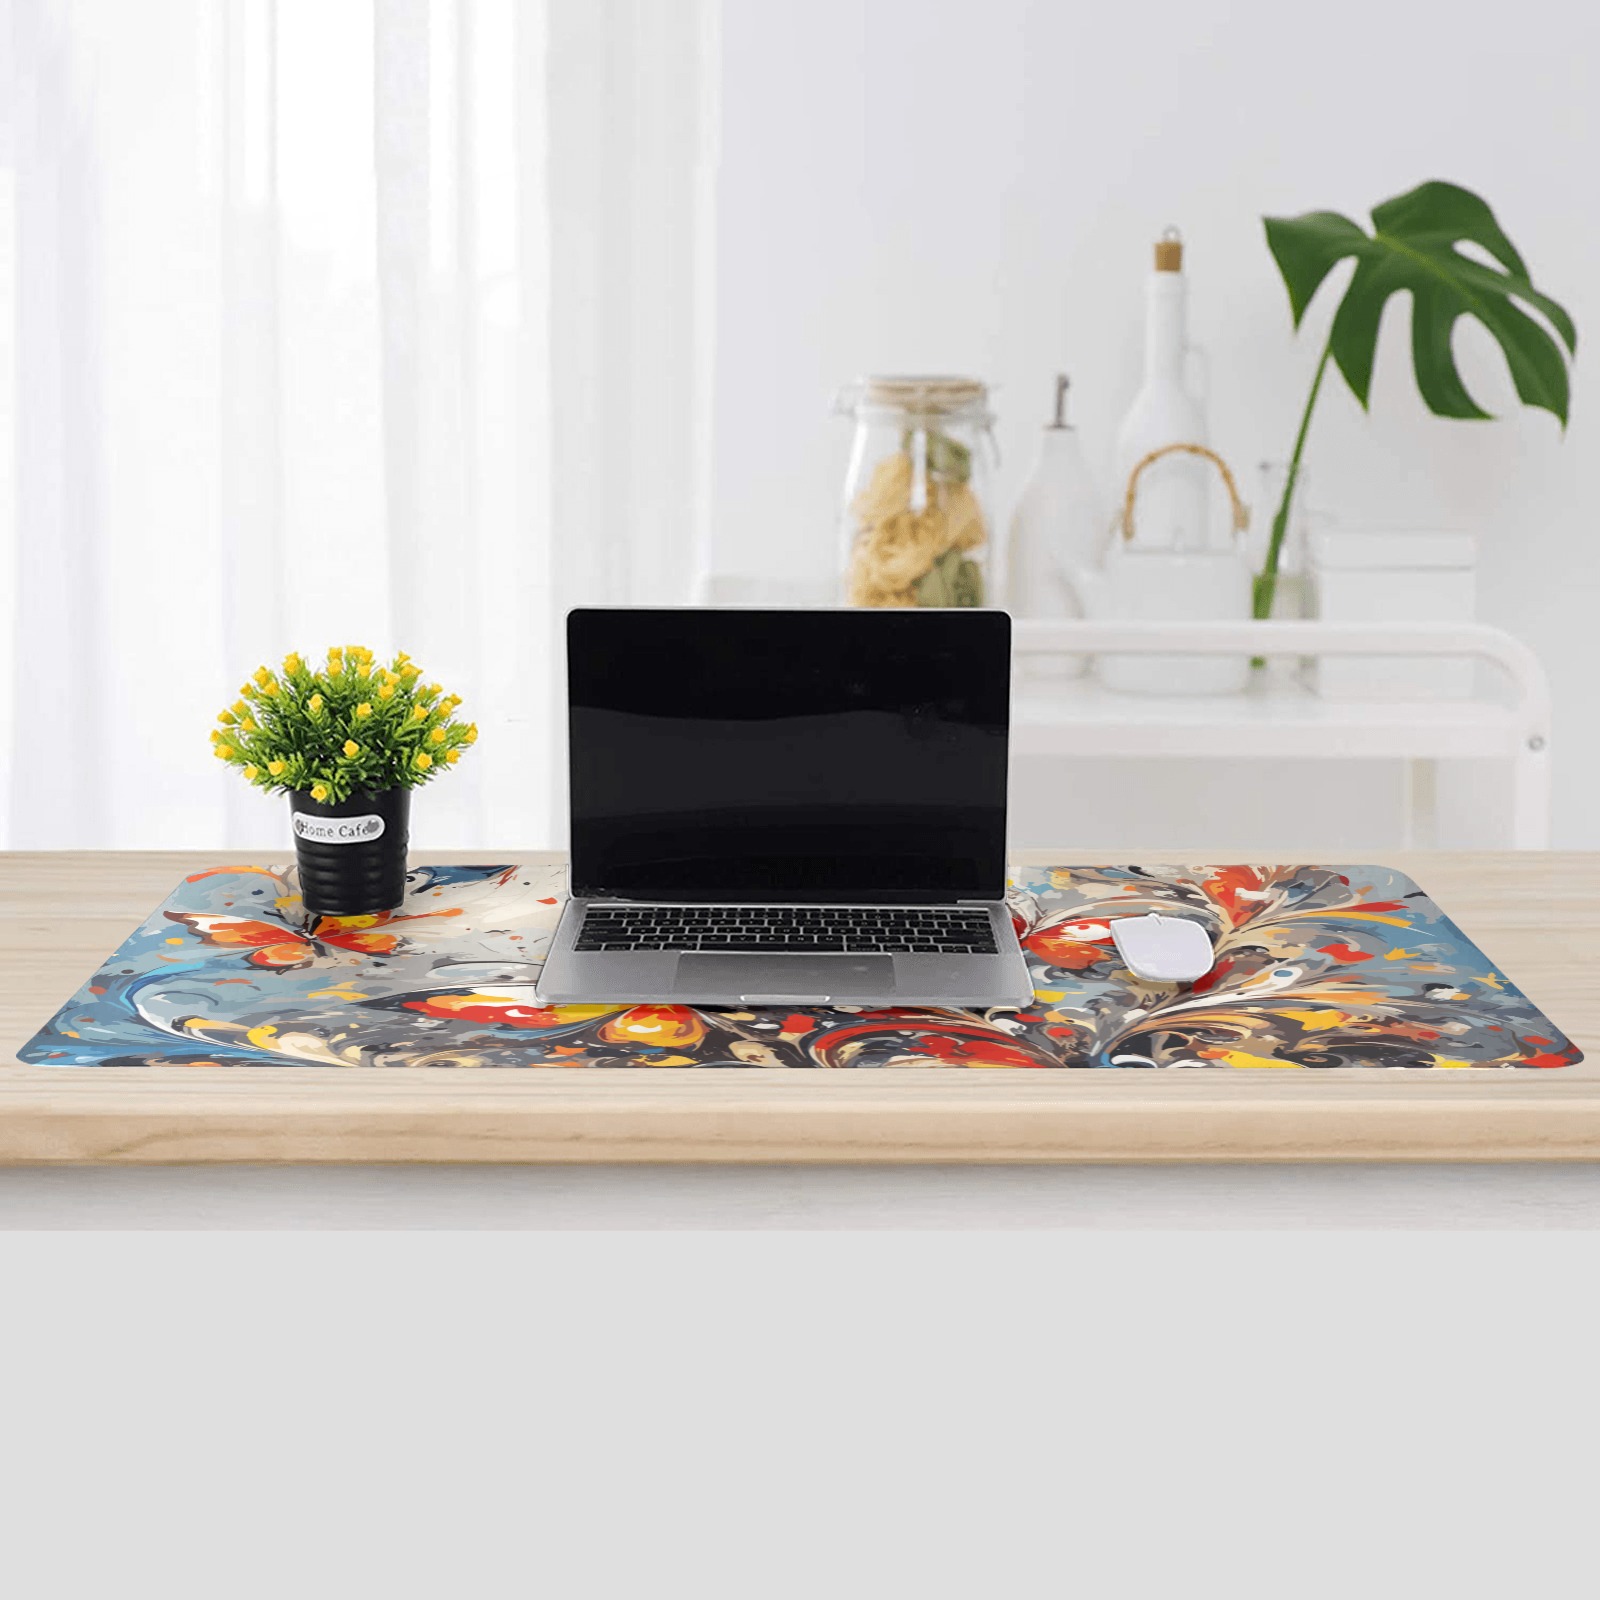 Decorative floral ornament and awesome butterflies Gaming Mousepad (35"x16")